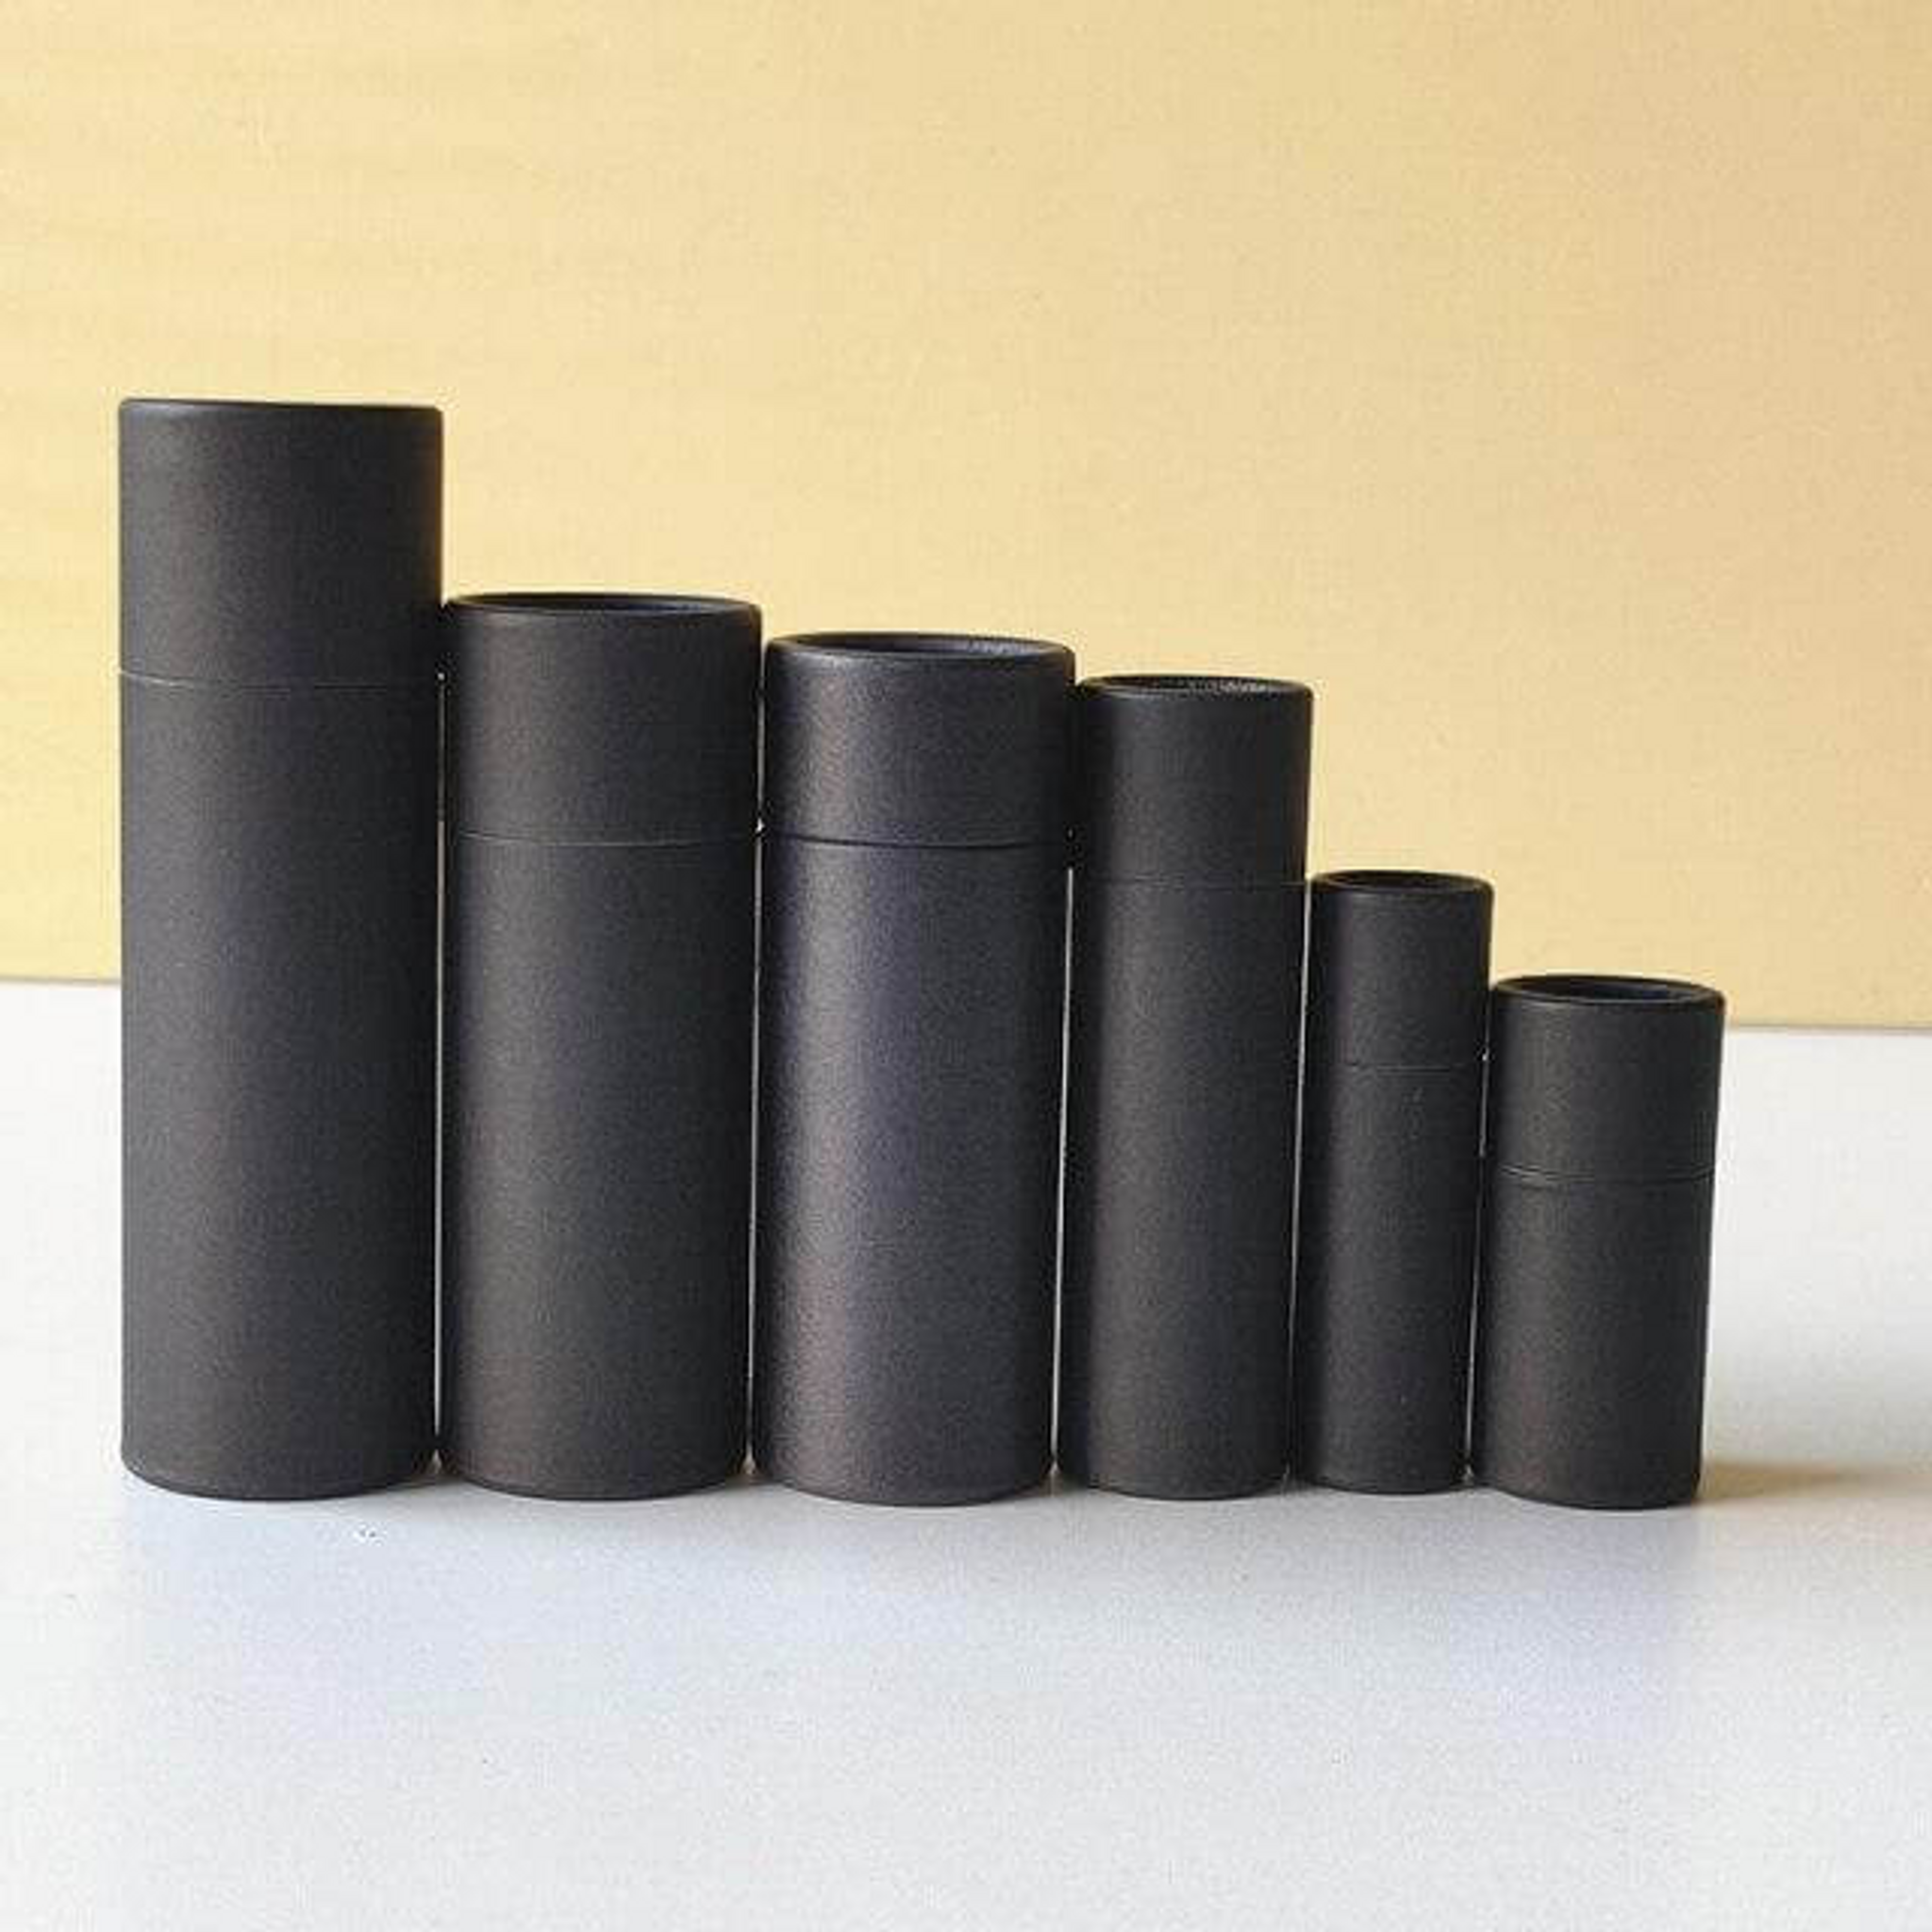 Black lip balm tubes in different sizes